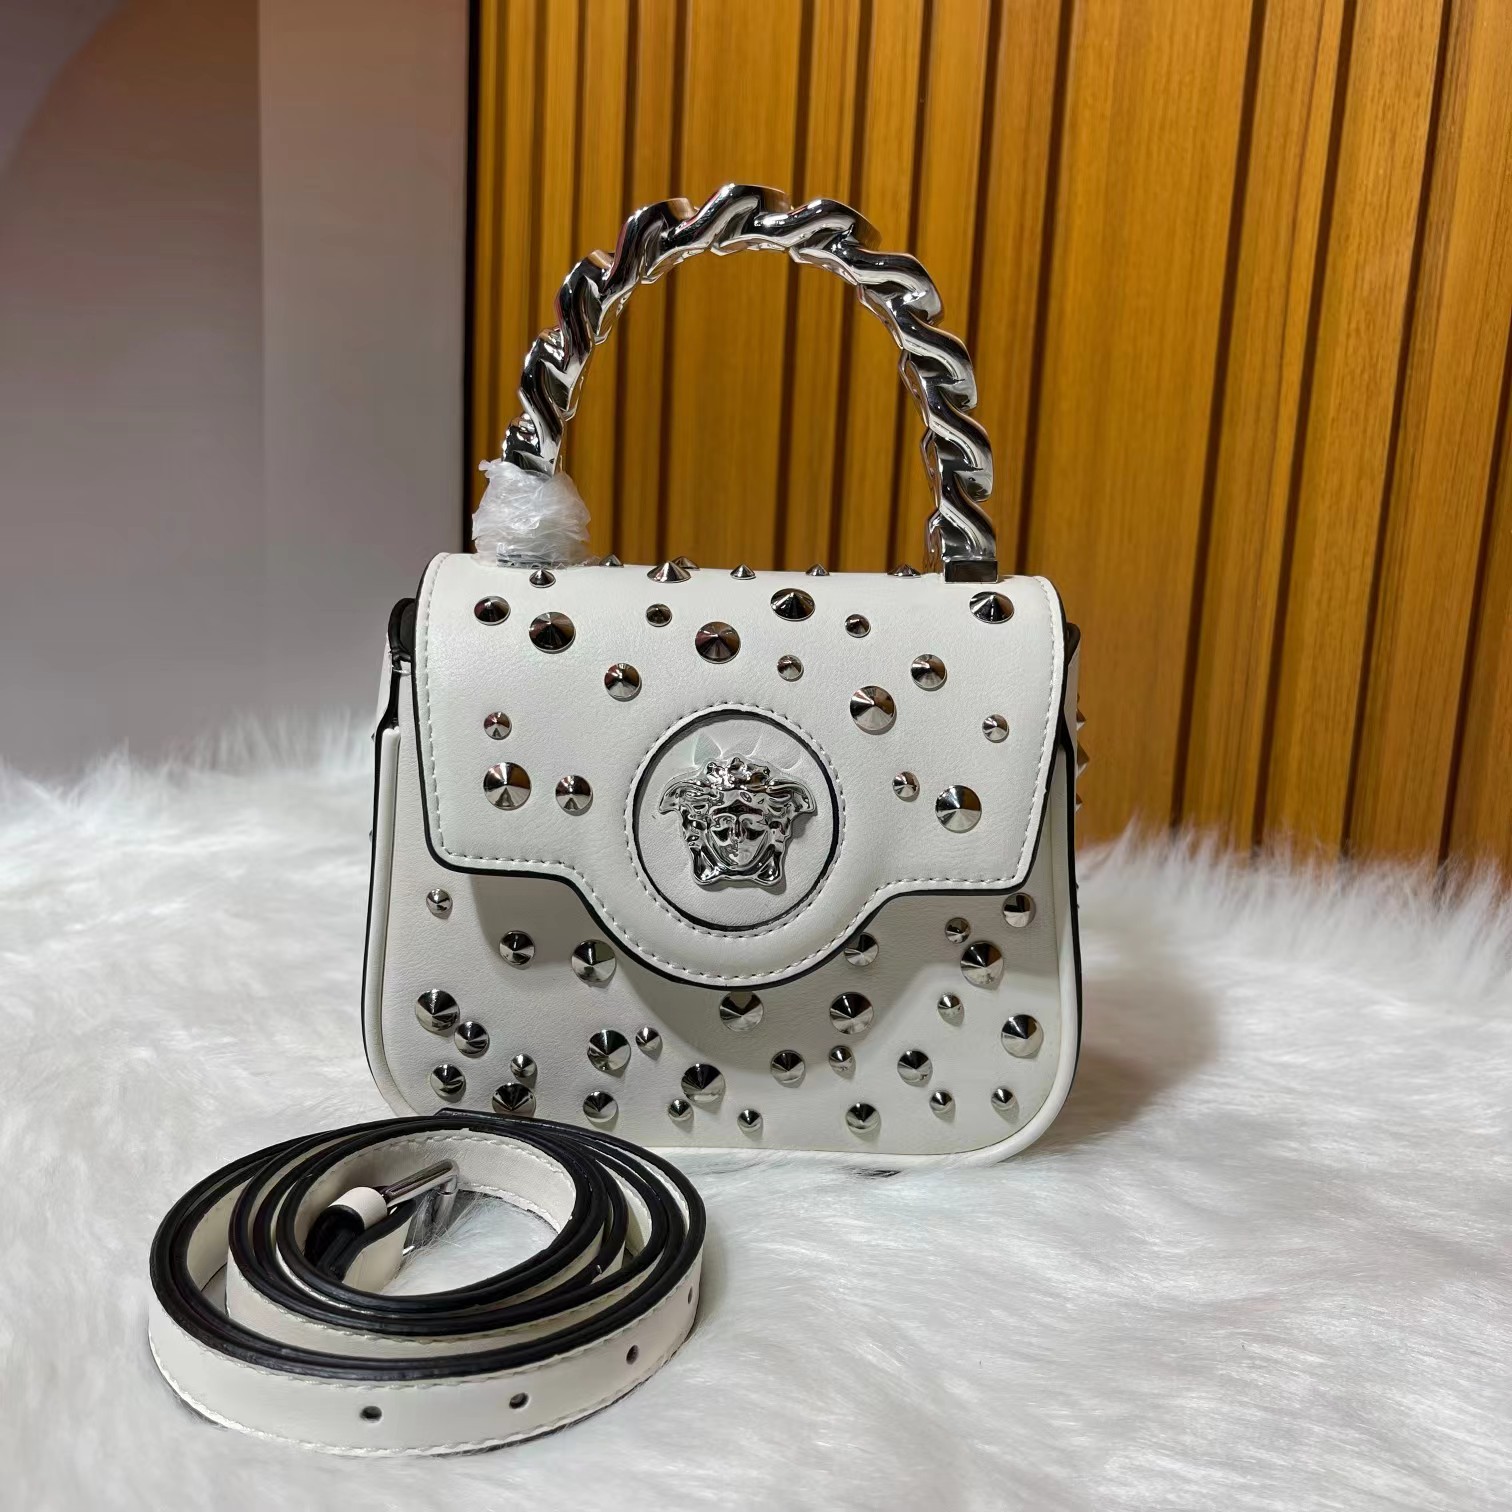 Versace New handbags with rivets decoration silver metal handle and shoulder belts